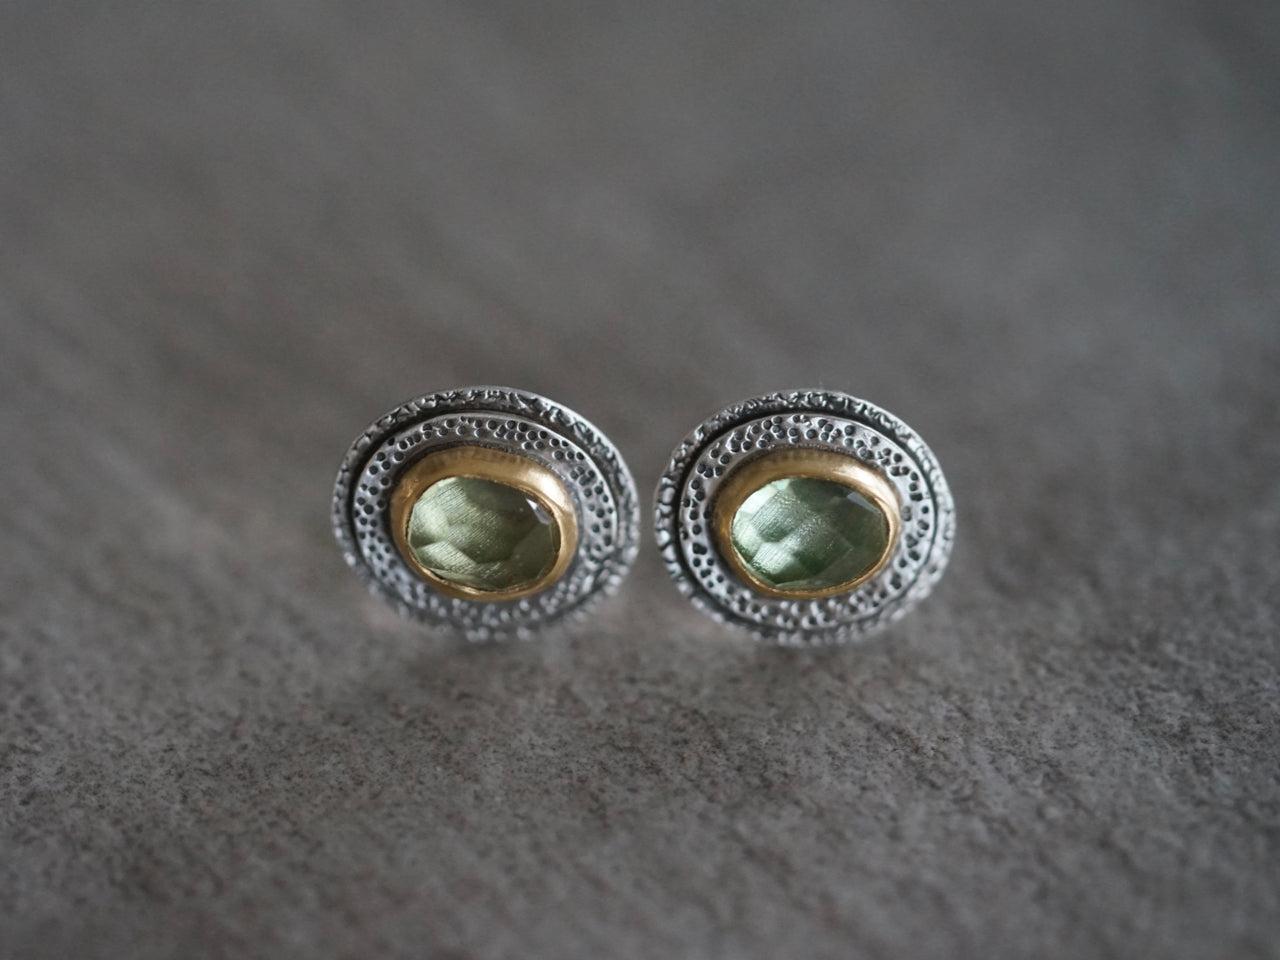 Green tourmaline and 22k gold post earrings